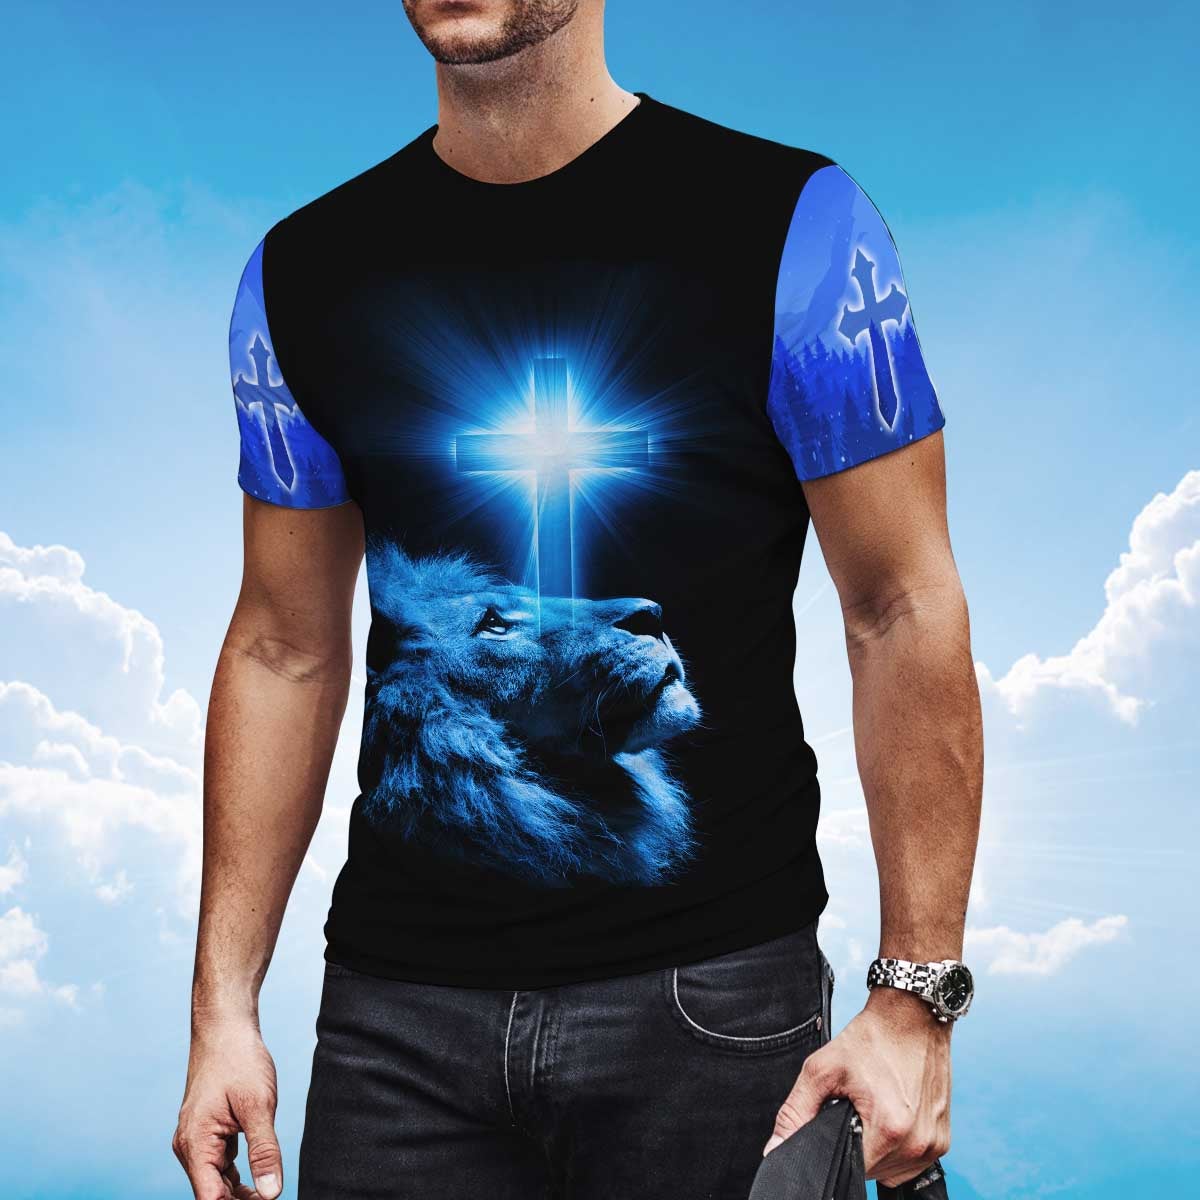 Way Maker Miracle Worker Lion And Light Cross T Shirt Coolspod